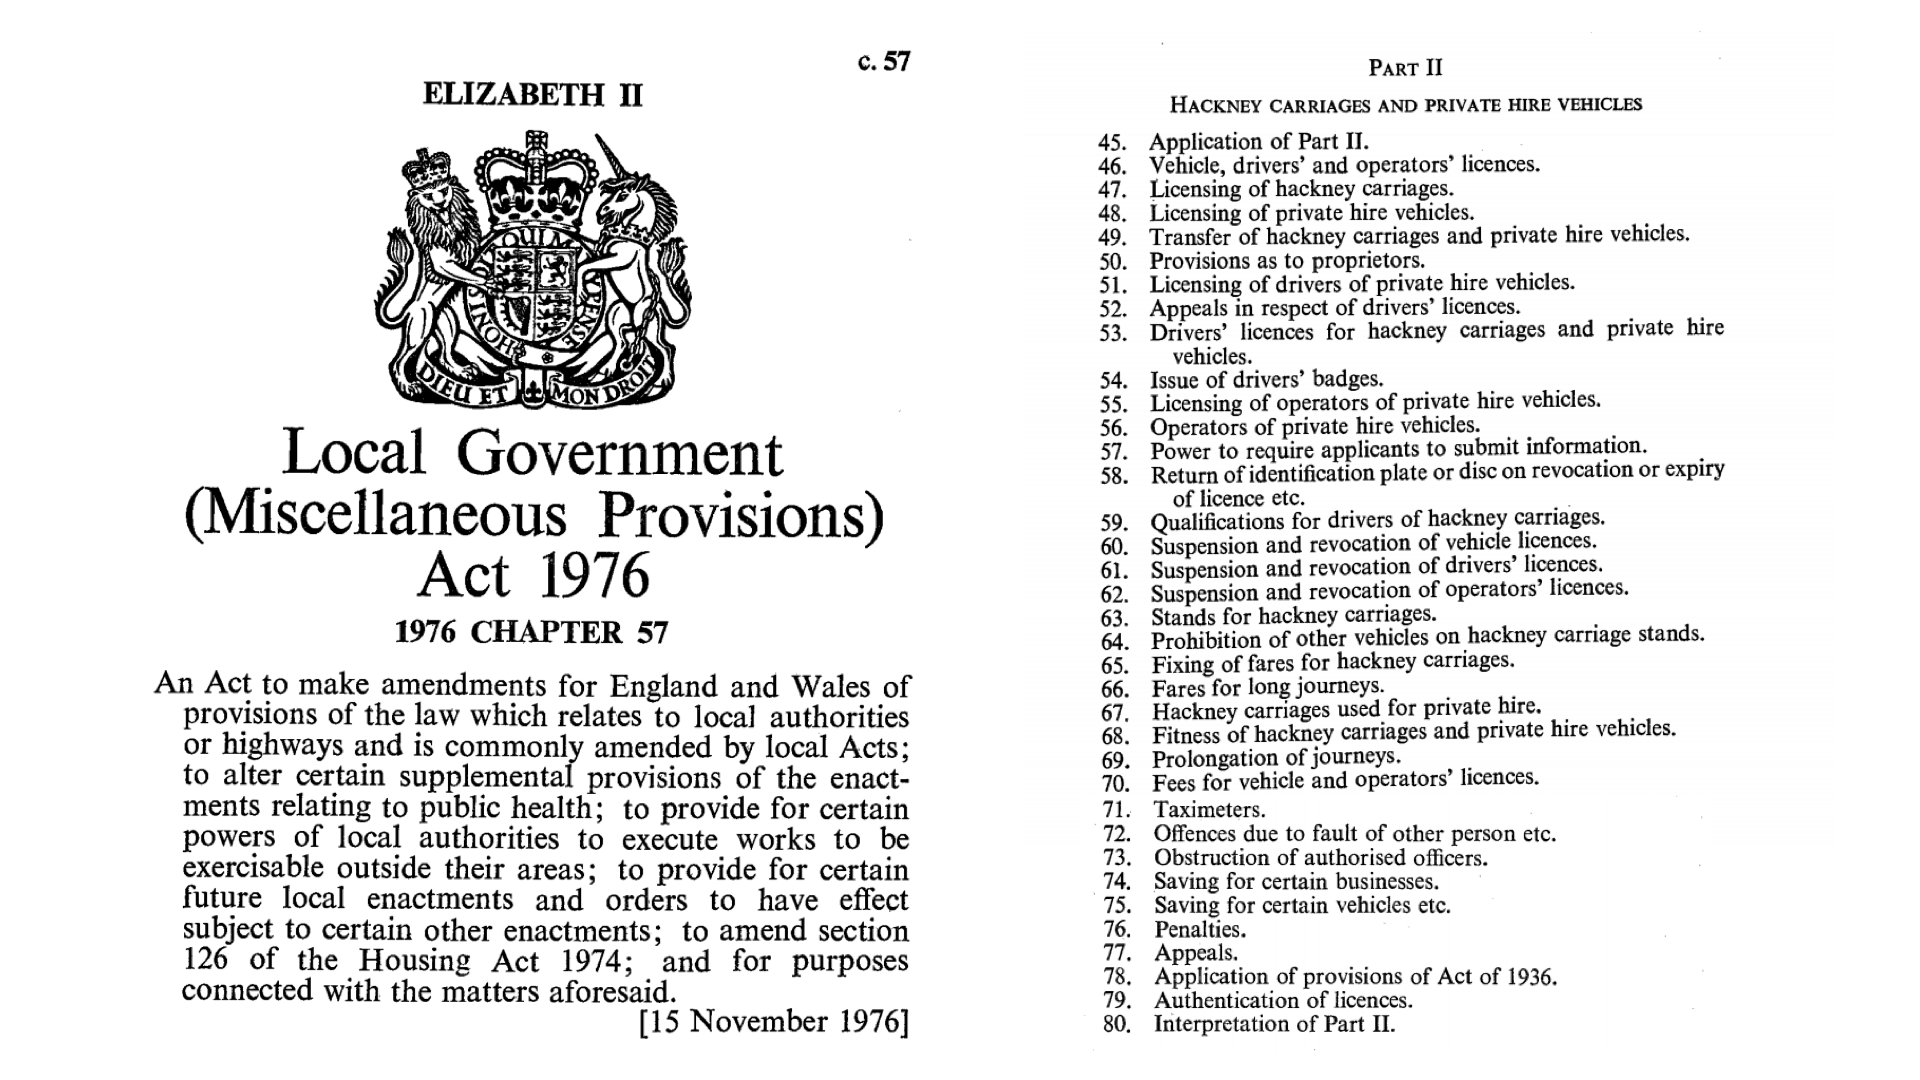 Local Government (Miscellaneous Provisions) Act 1976